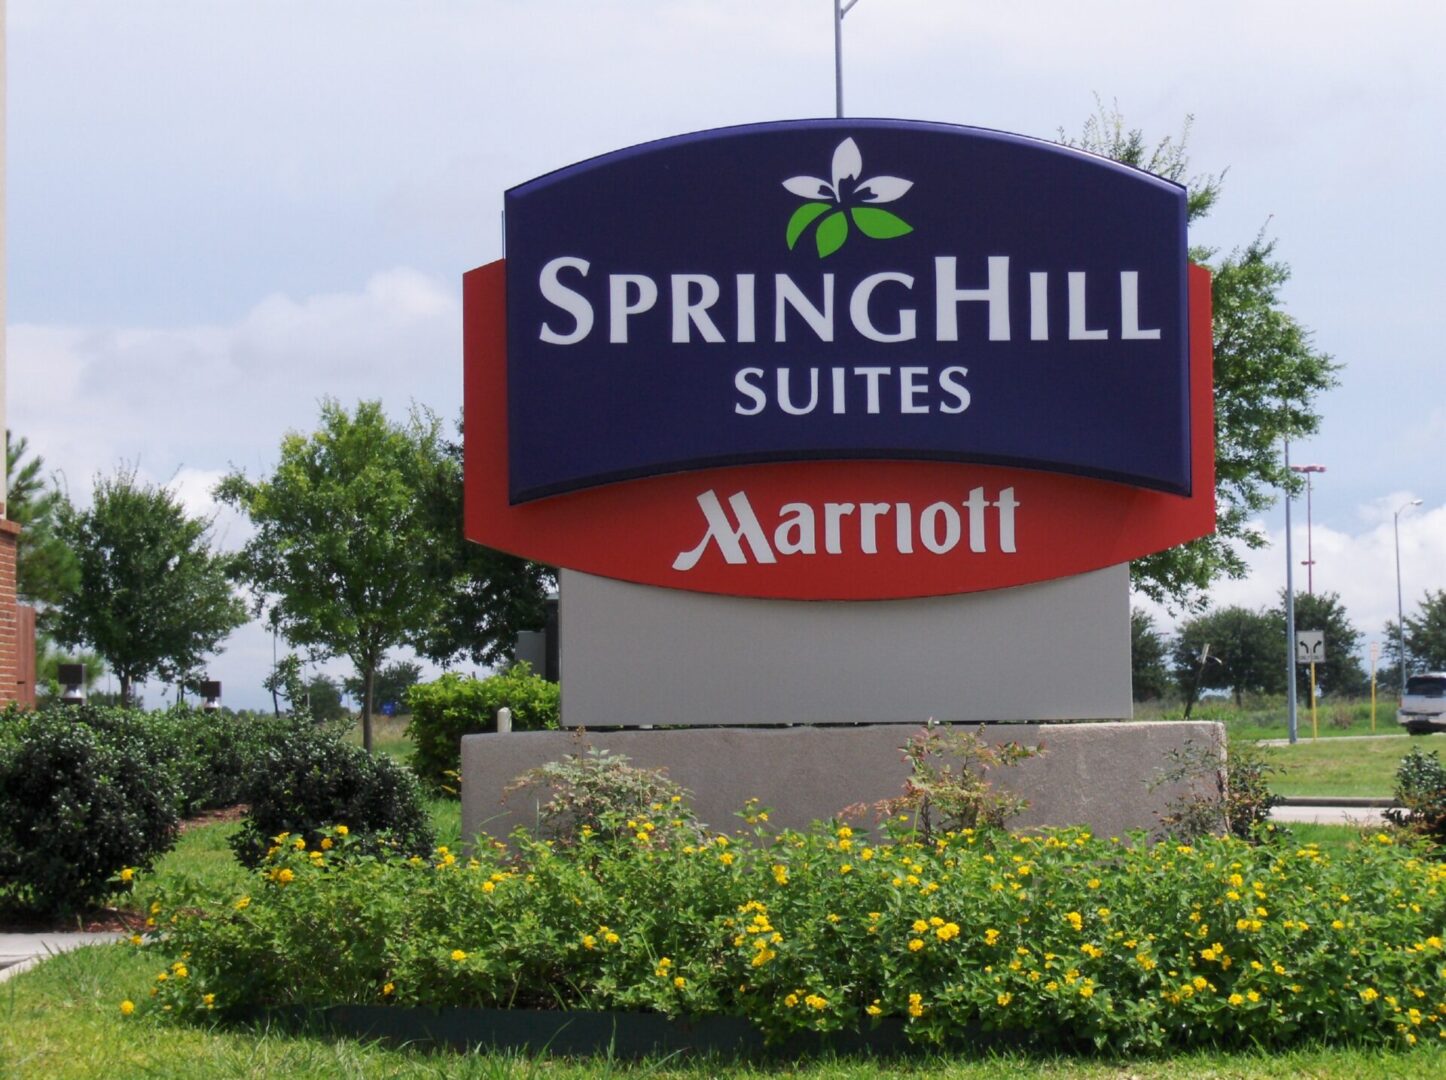 Spring hill suites and marriot monument signage board